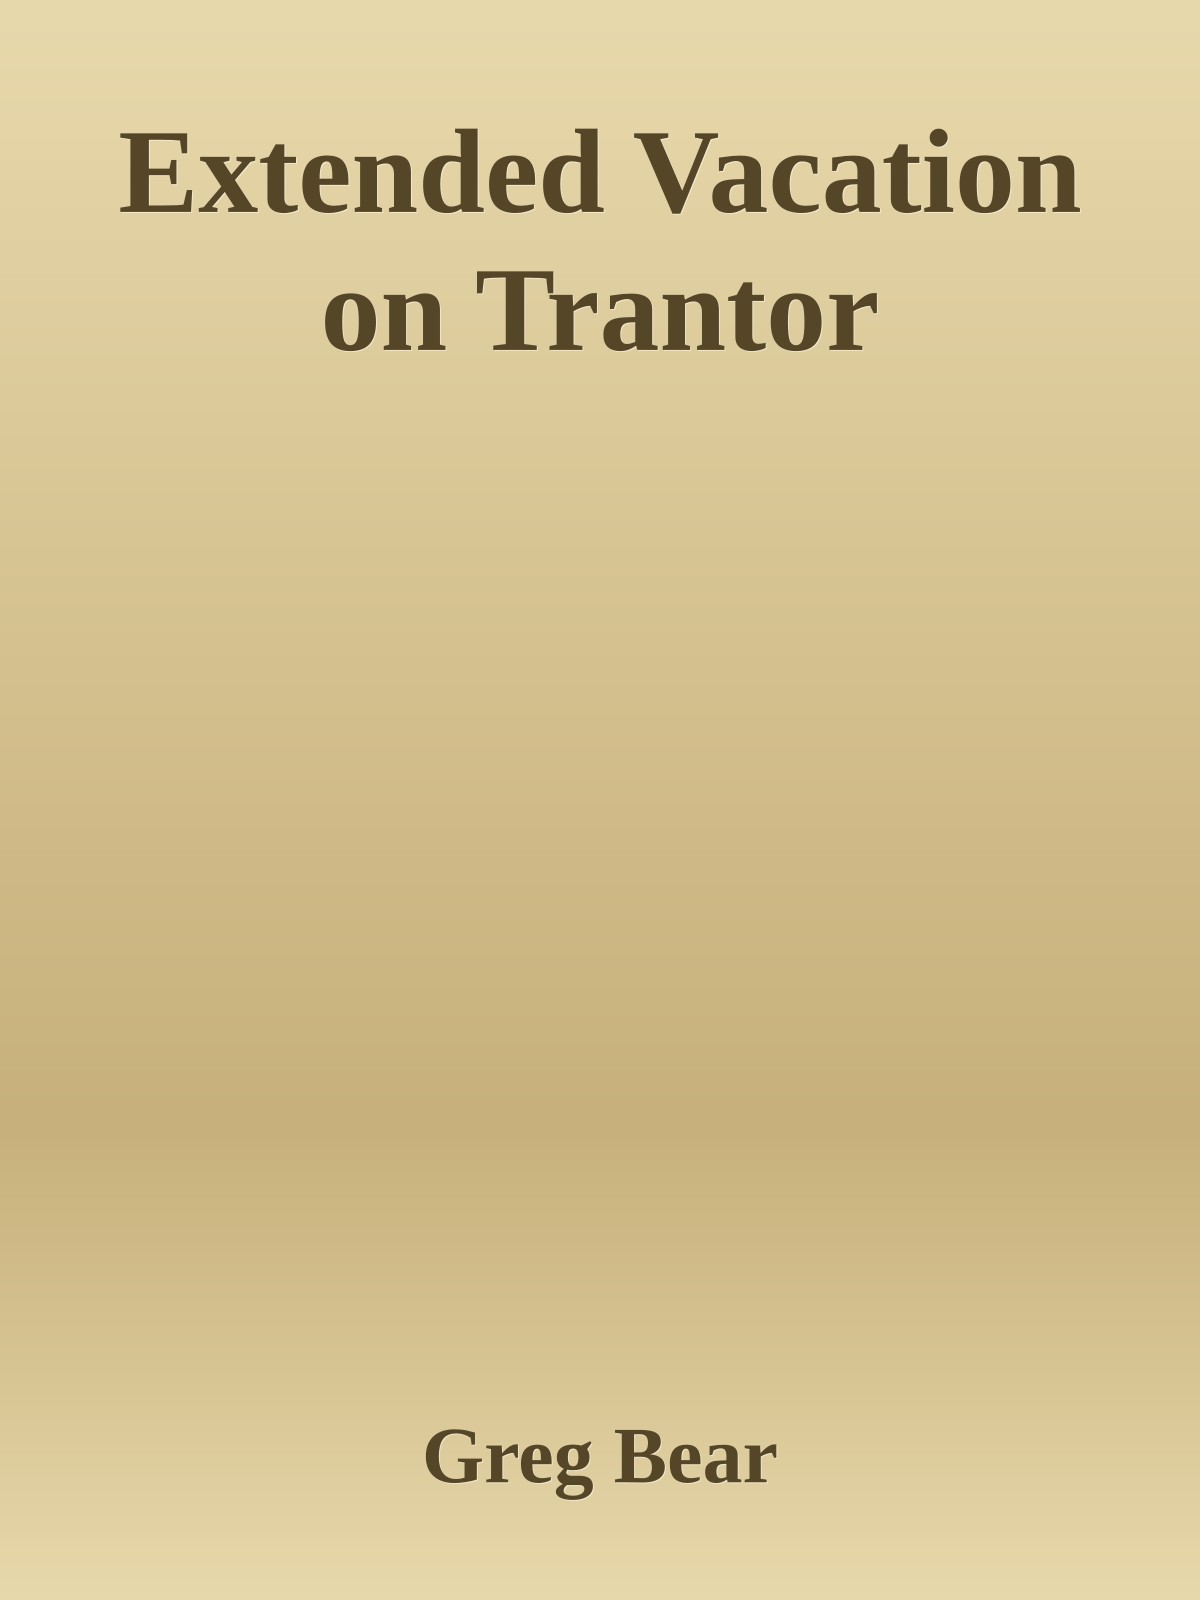 Extended Vacation on Trantor